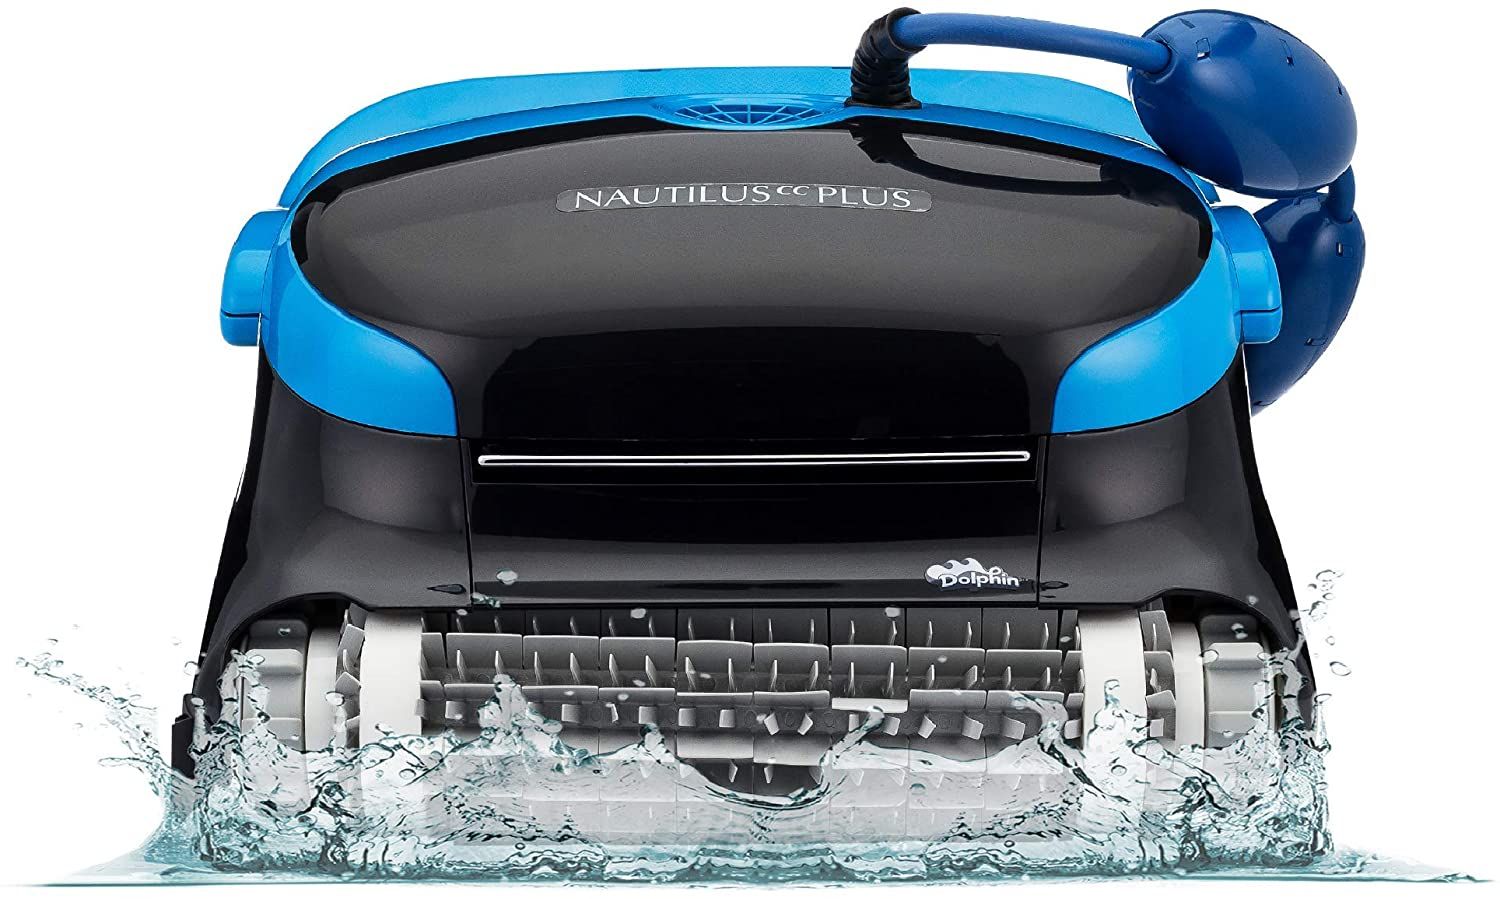 A robot pool cleaner